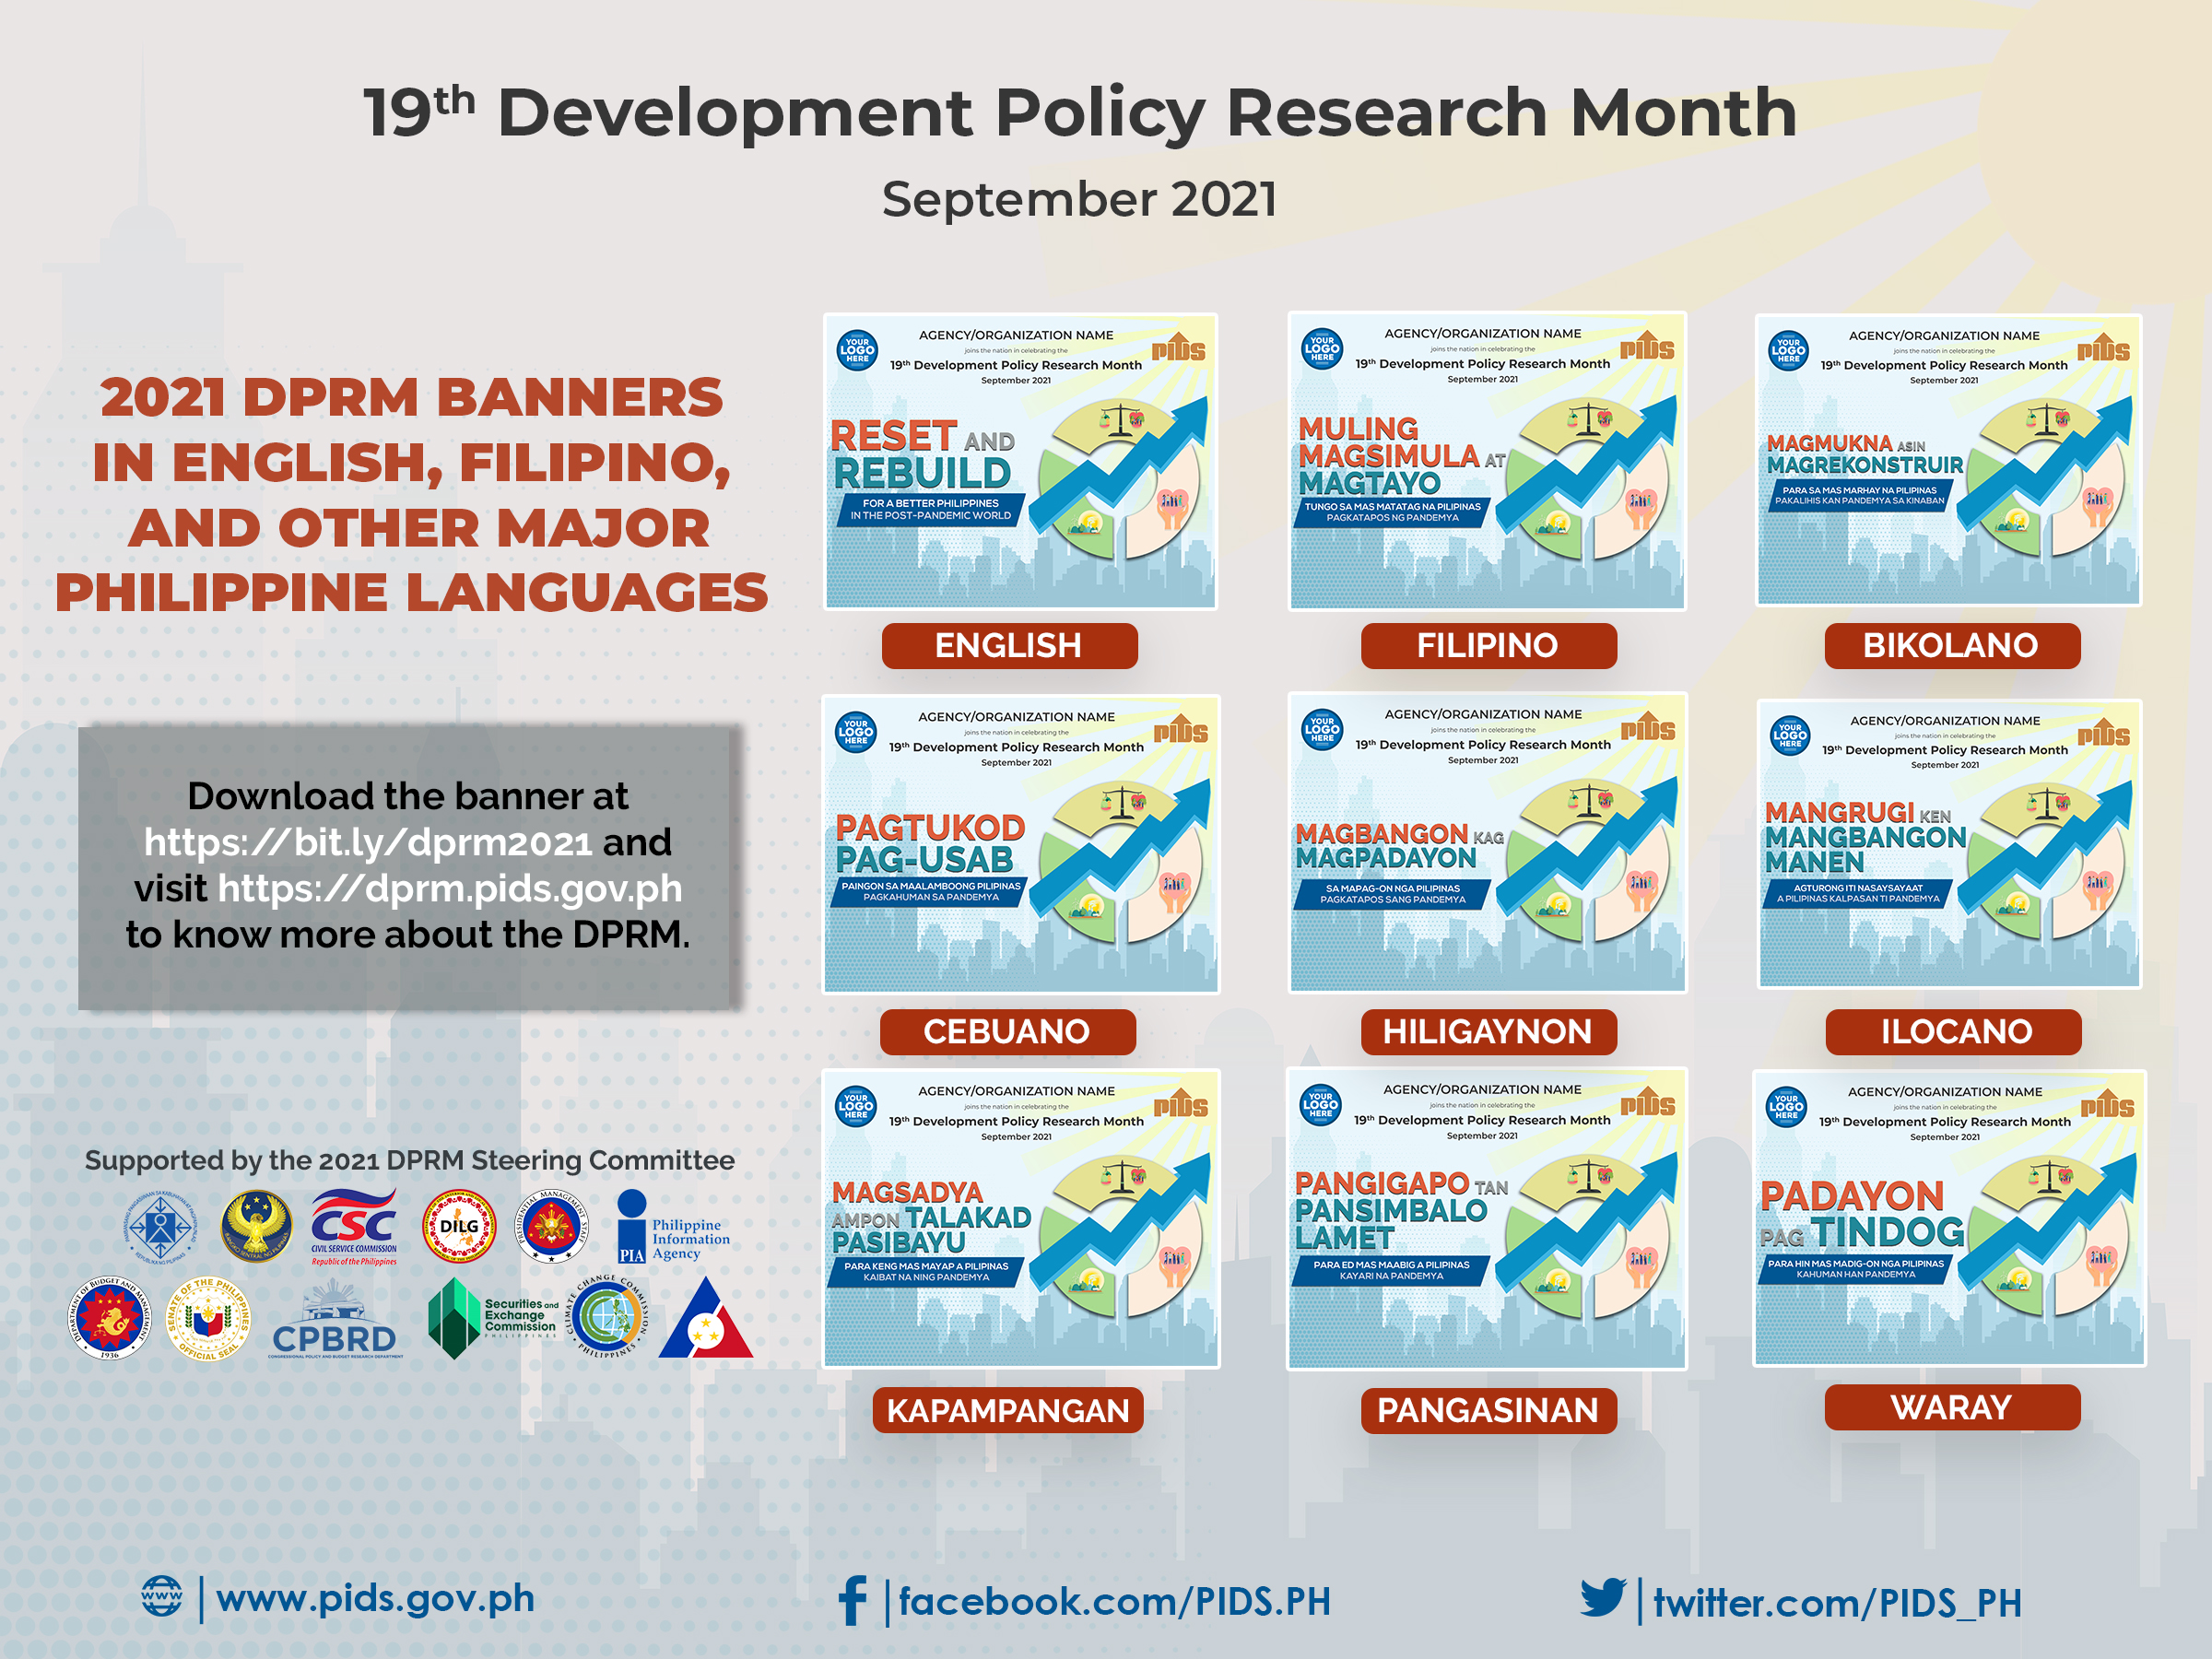 2021 DPRM Banners in English, Filipino, and Other Major Philippine Languages